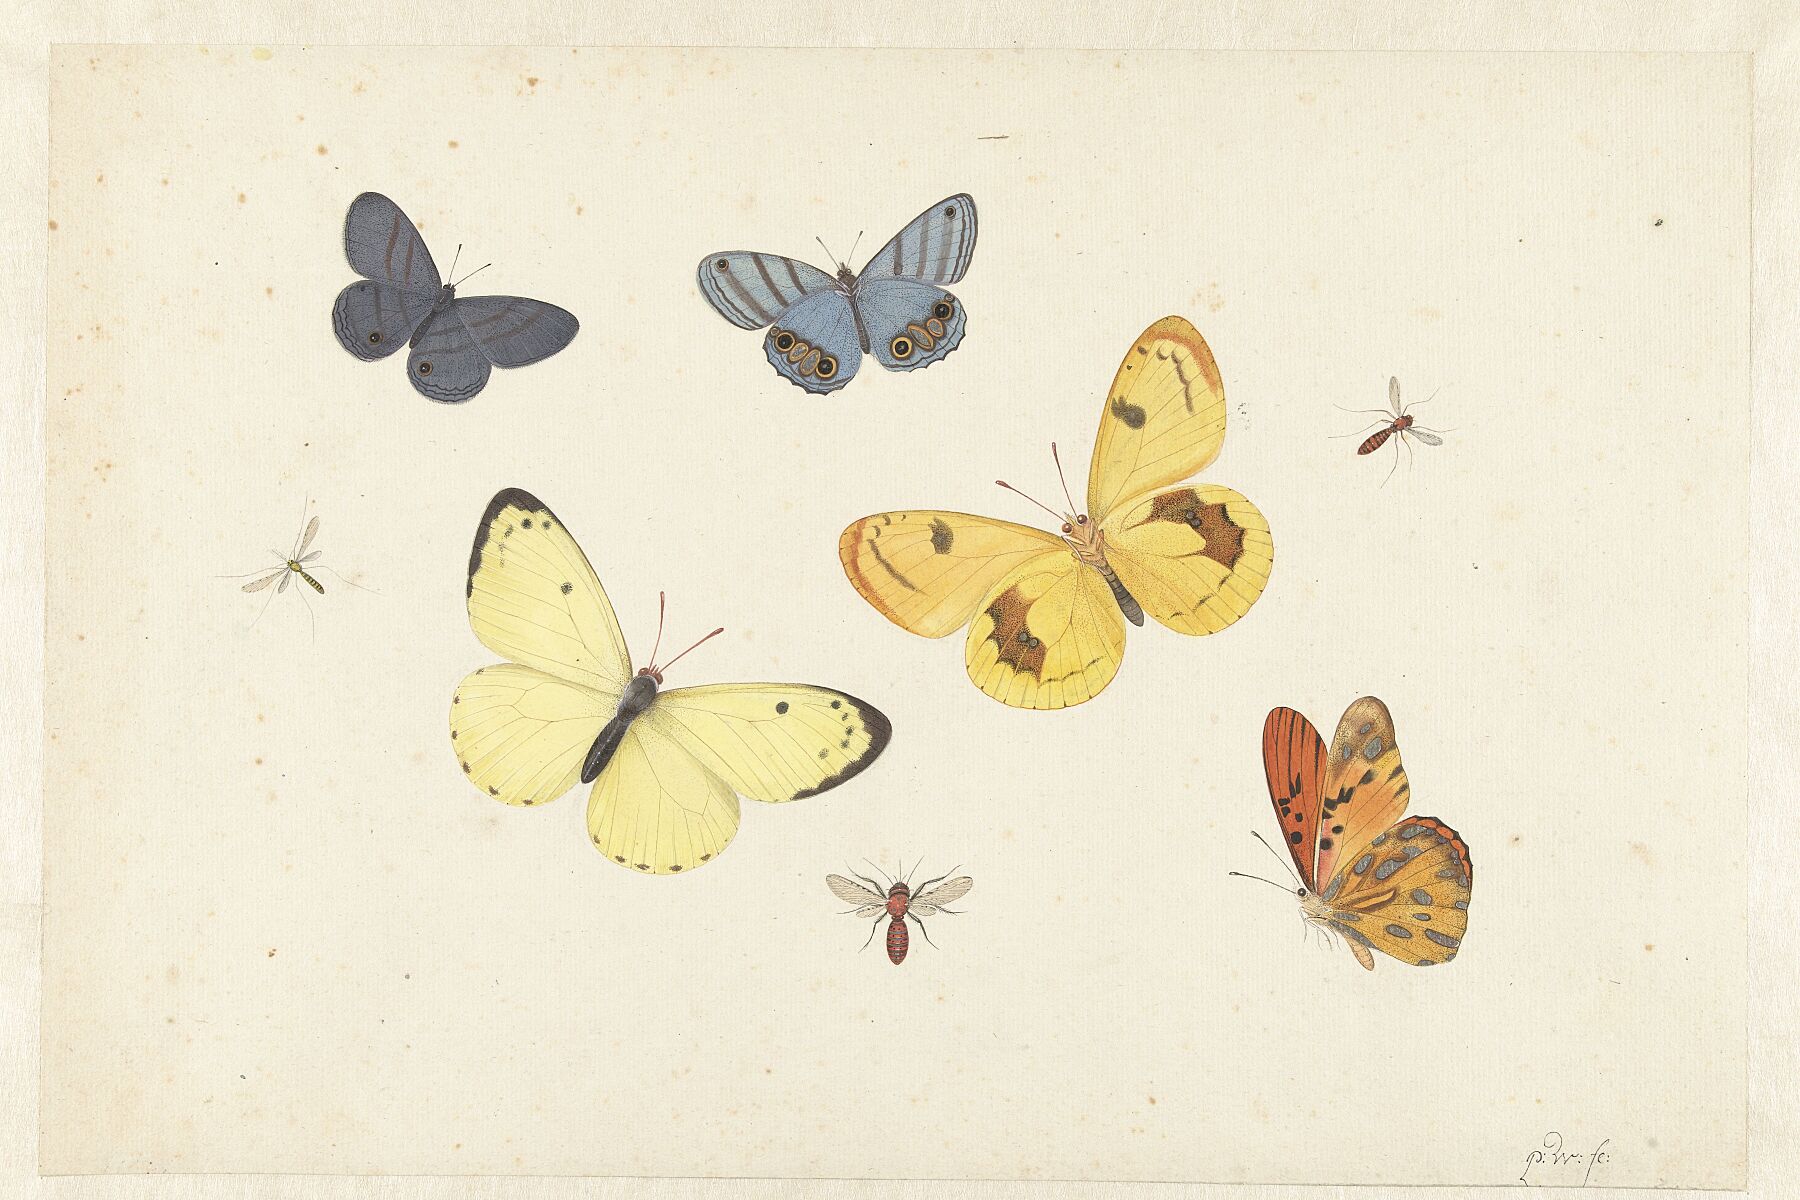 Sheet of Studies with Five Butterflies, a Wasp, and Two Flies by Pieter Withoos - c. 1680